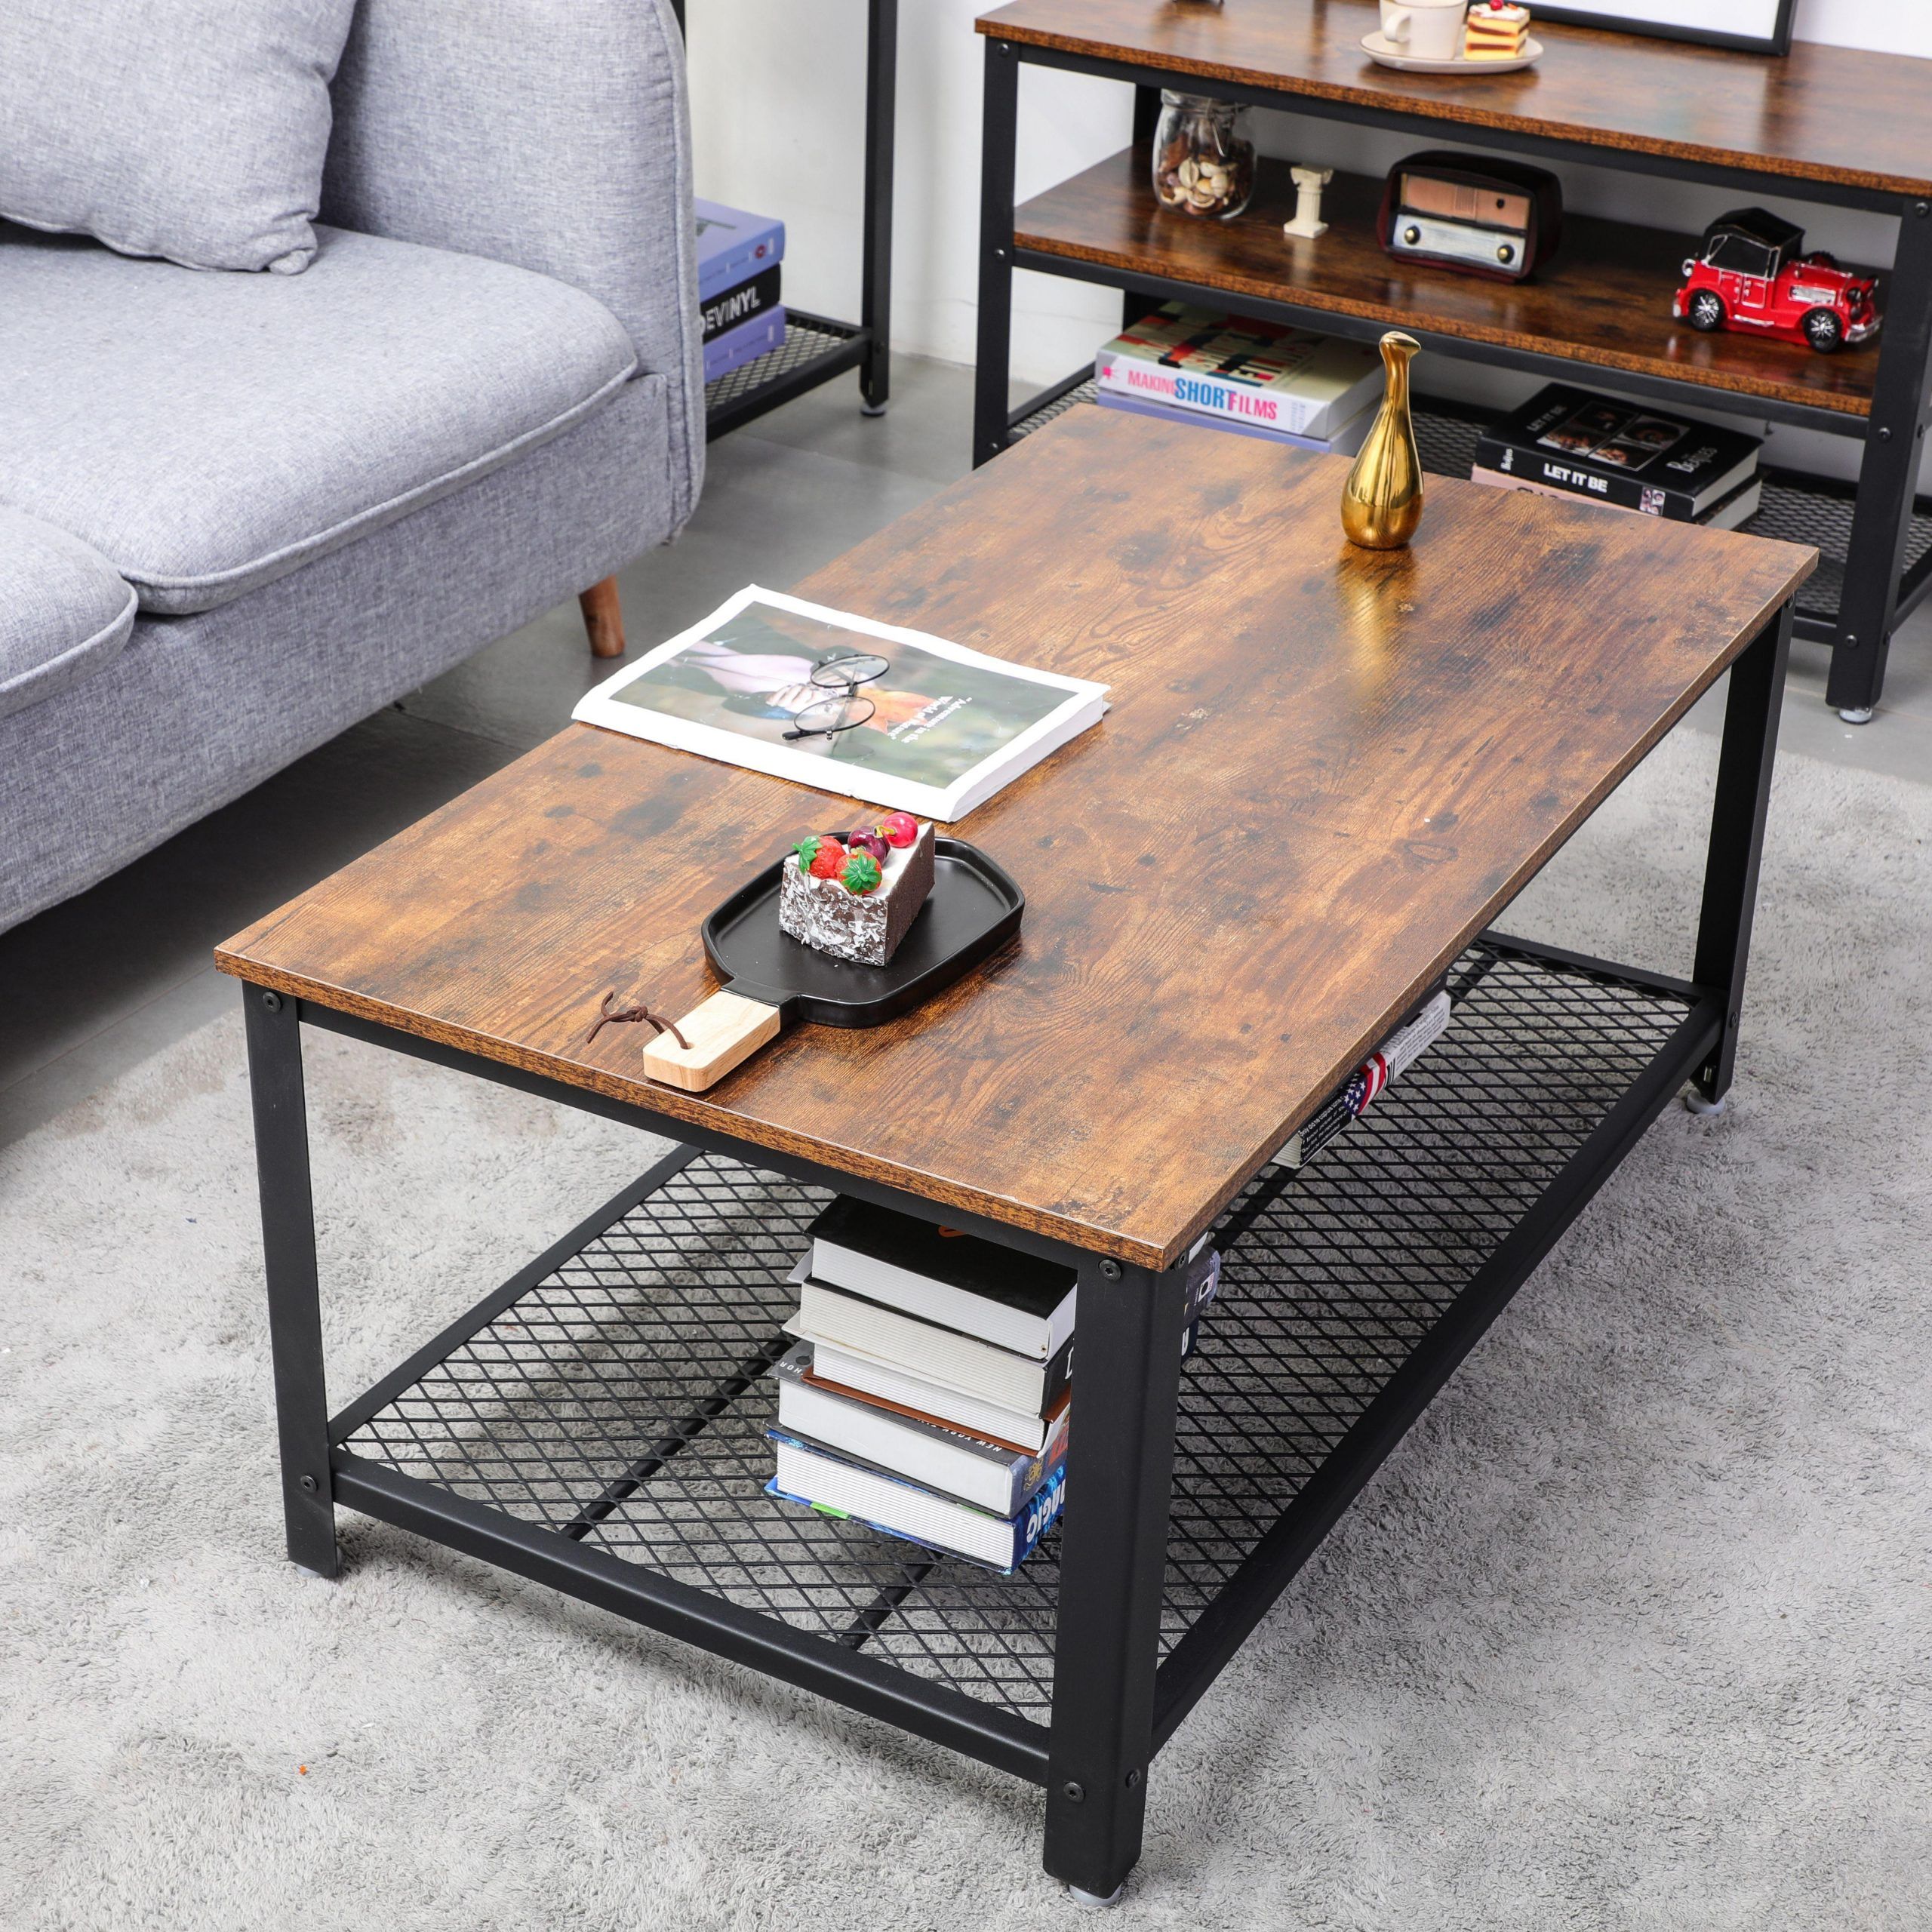 Farmhouse Coffee Table, 2 Tier Modern Industrial End Table With Storage Open  Shelf For Living Room, Tea Table, Furniture With Metal Frame, Rustic Brown  – Walmart Within Open Shelf Coffee Tables (View 12 of 20)